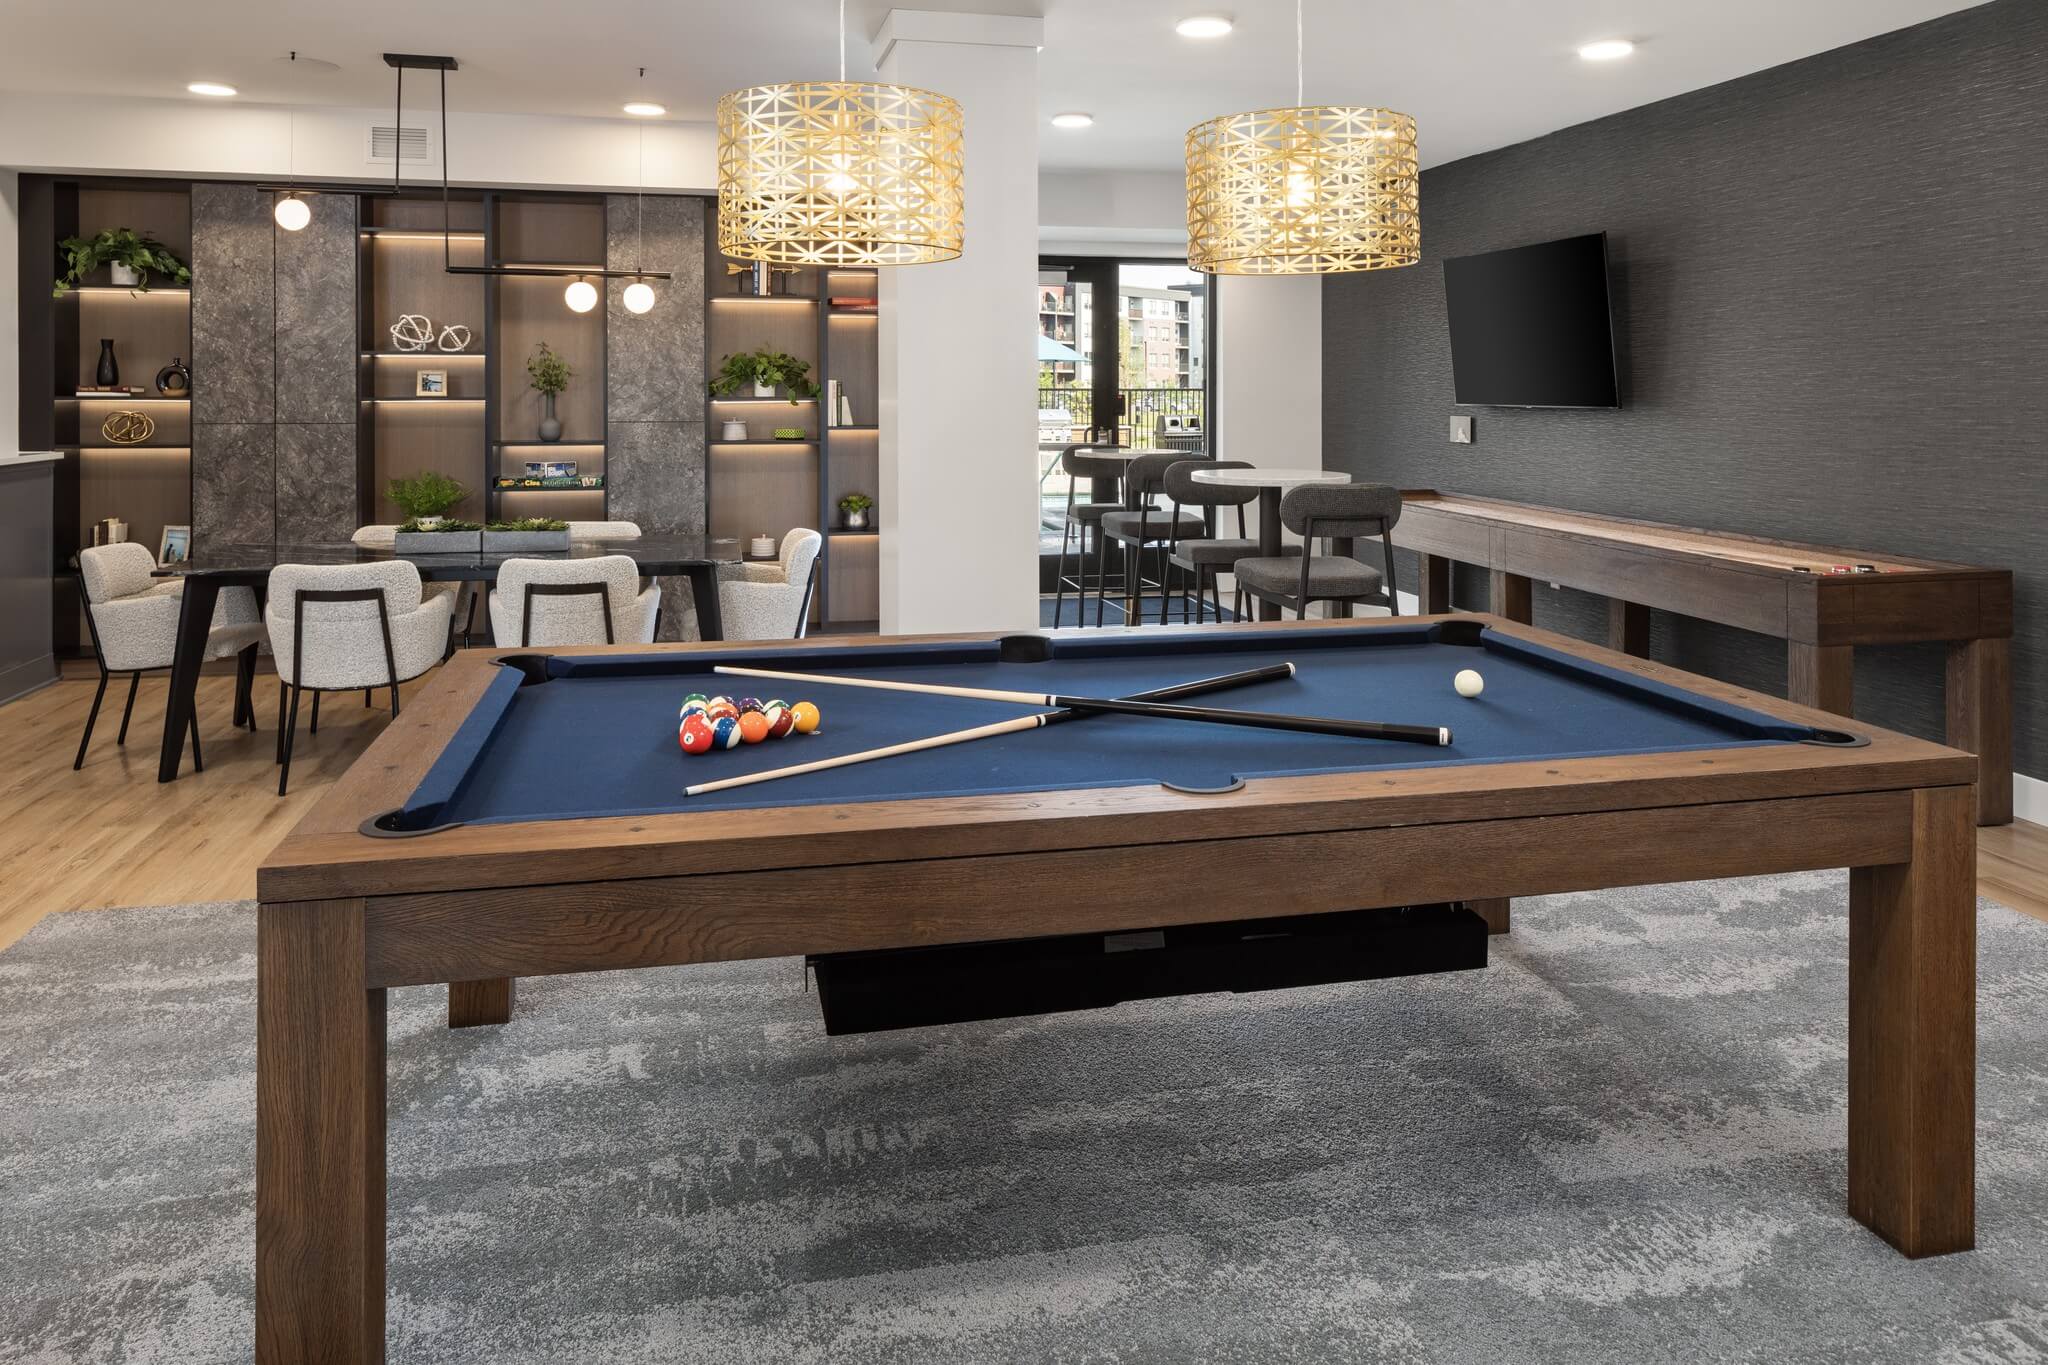 Aster at Riverdale Station game room showing a billiards table